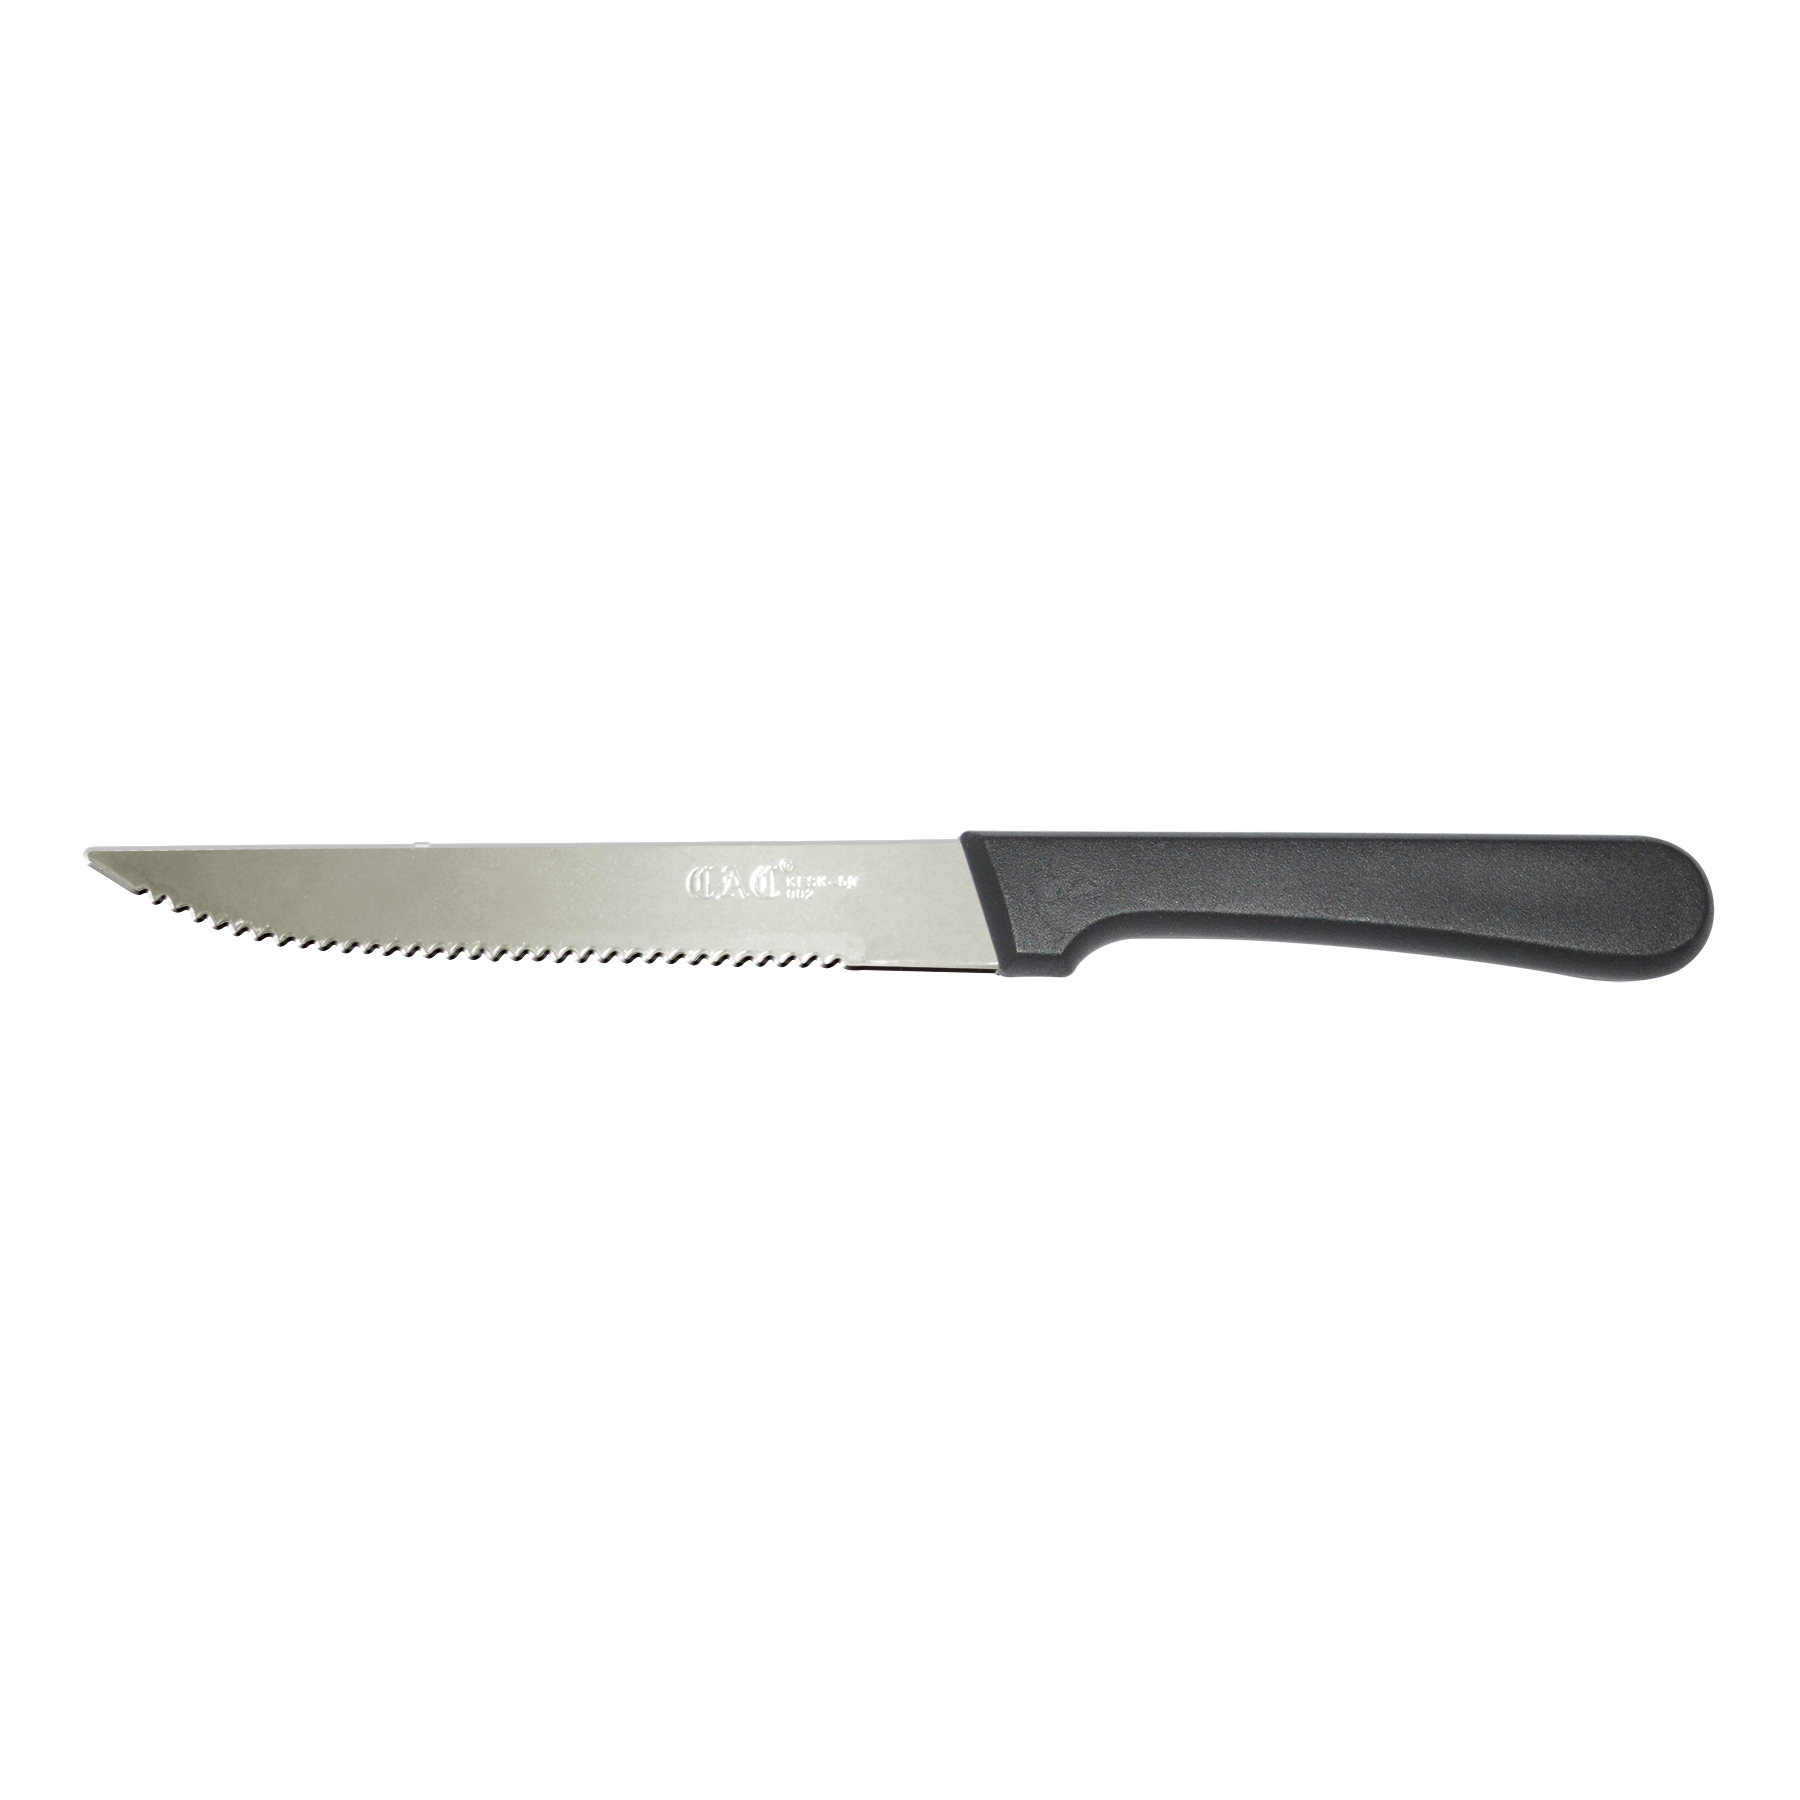 CAC China KESK-50 Knife Steak with Pointed Tip, Plastic Handle 5" - 1 dozen